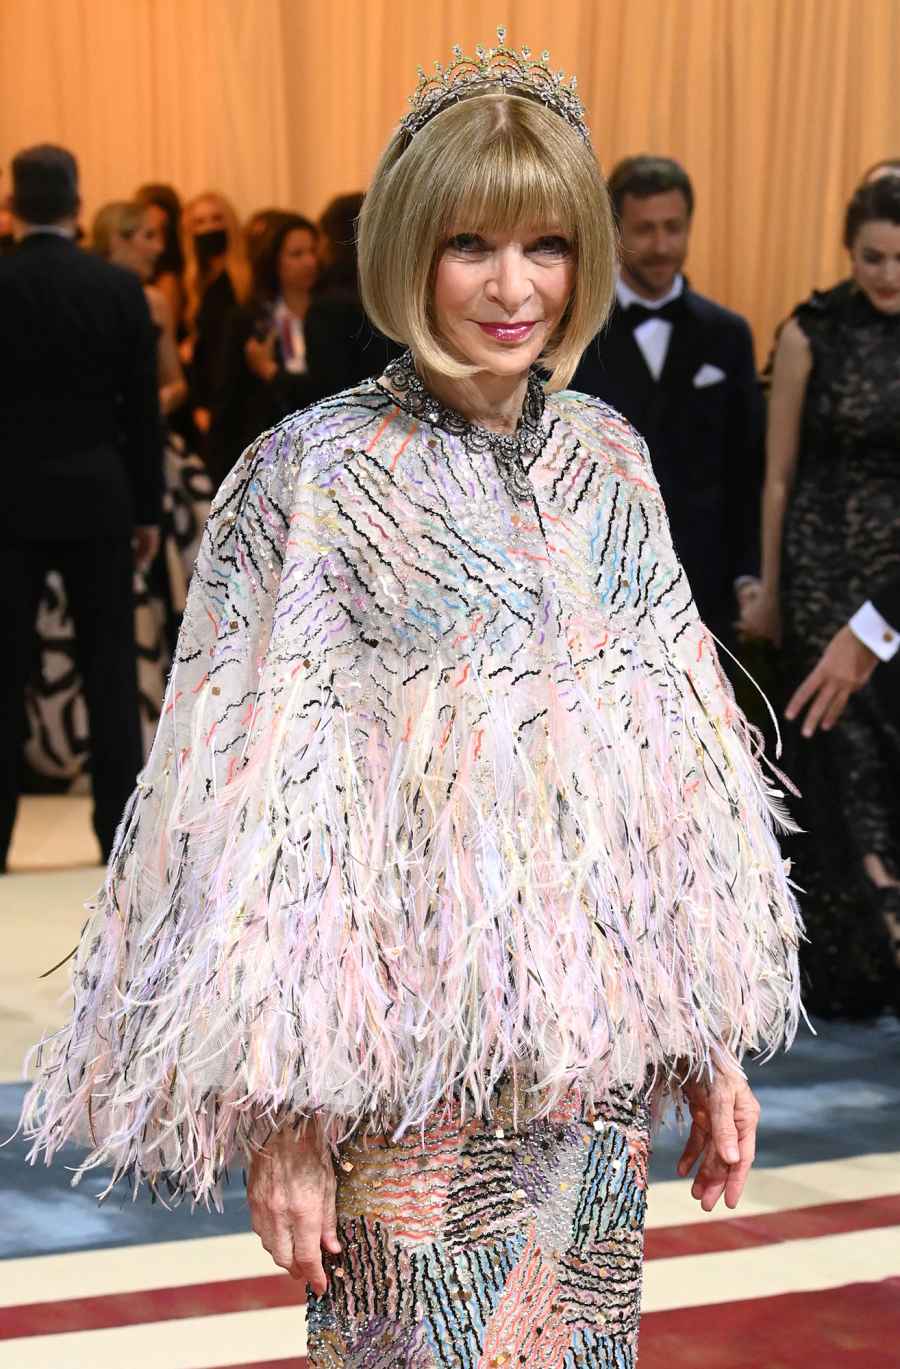 Met Gala Icon Anna Wintour Glitters in Feathery Flock Tiara on the 2022 Red Carpet Met Gala 2022 10